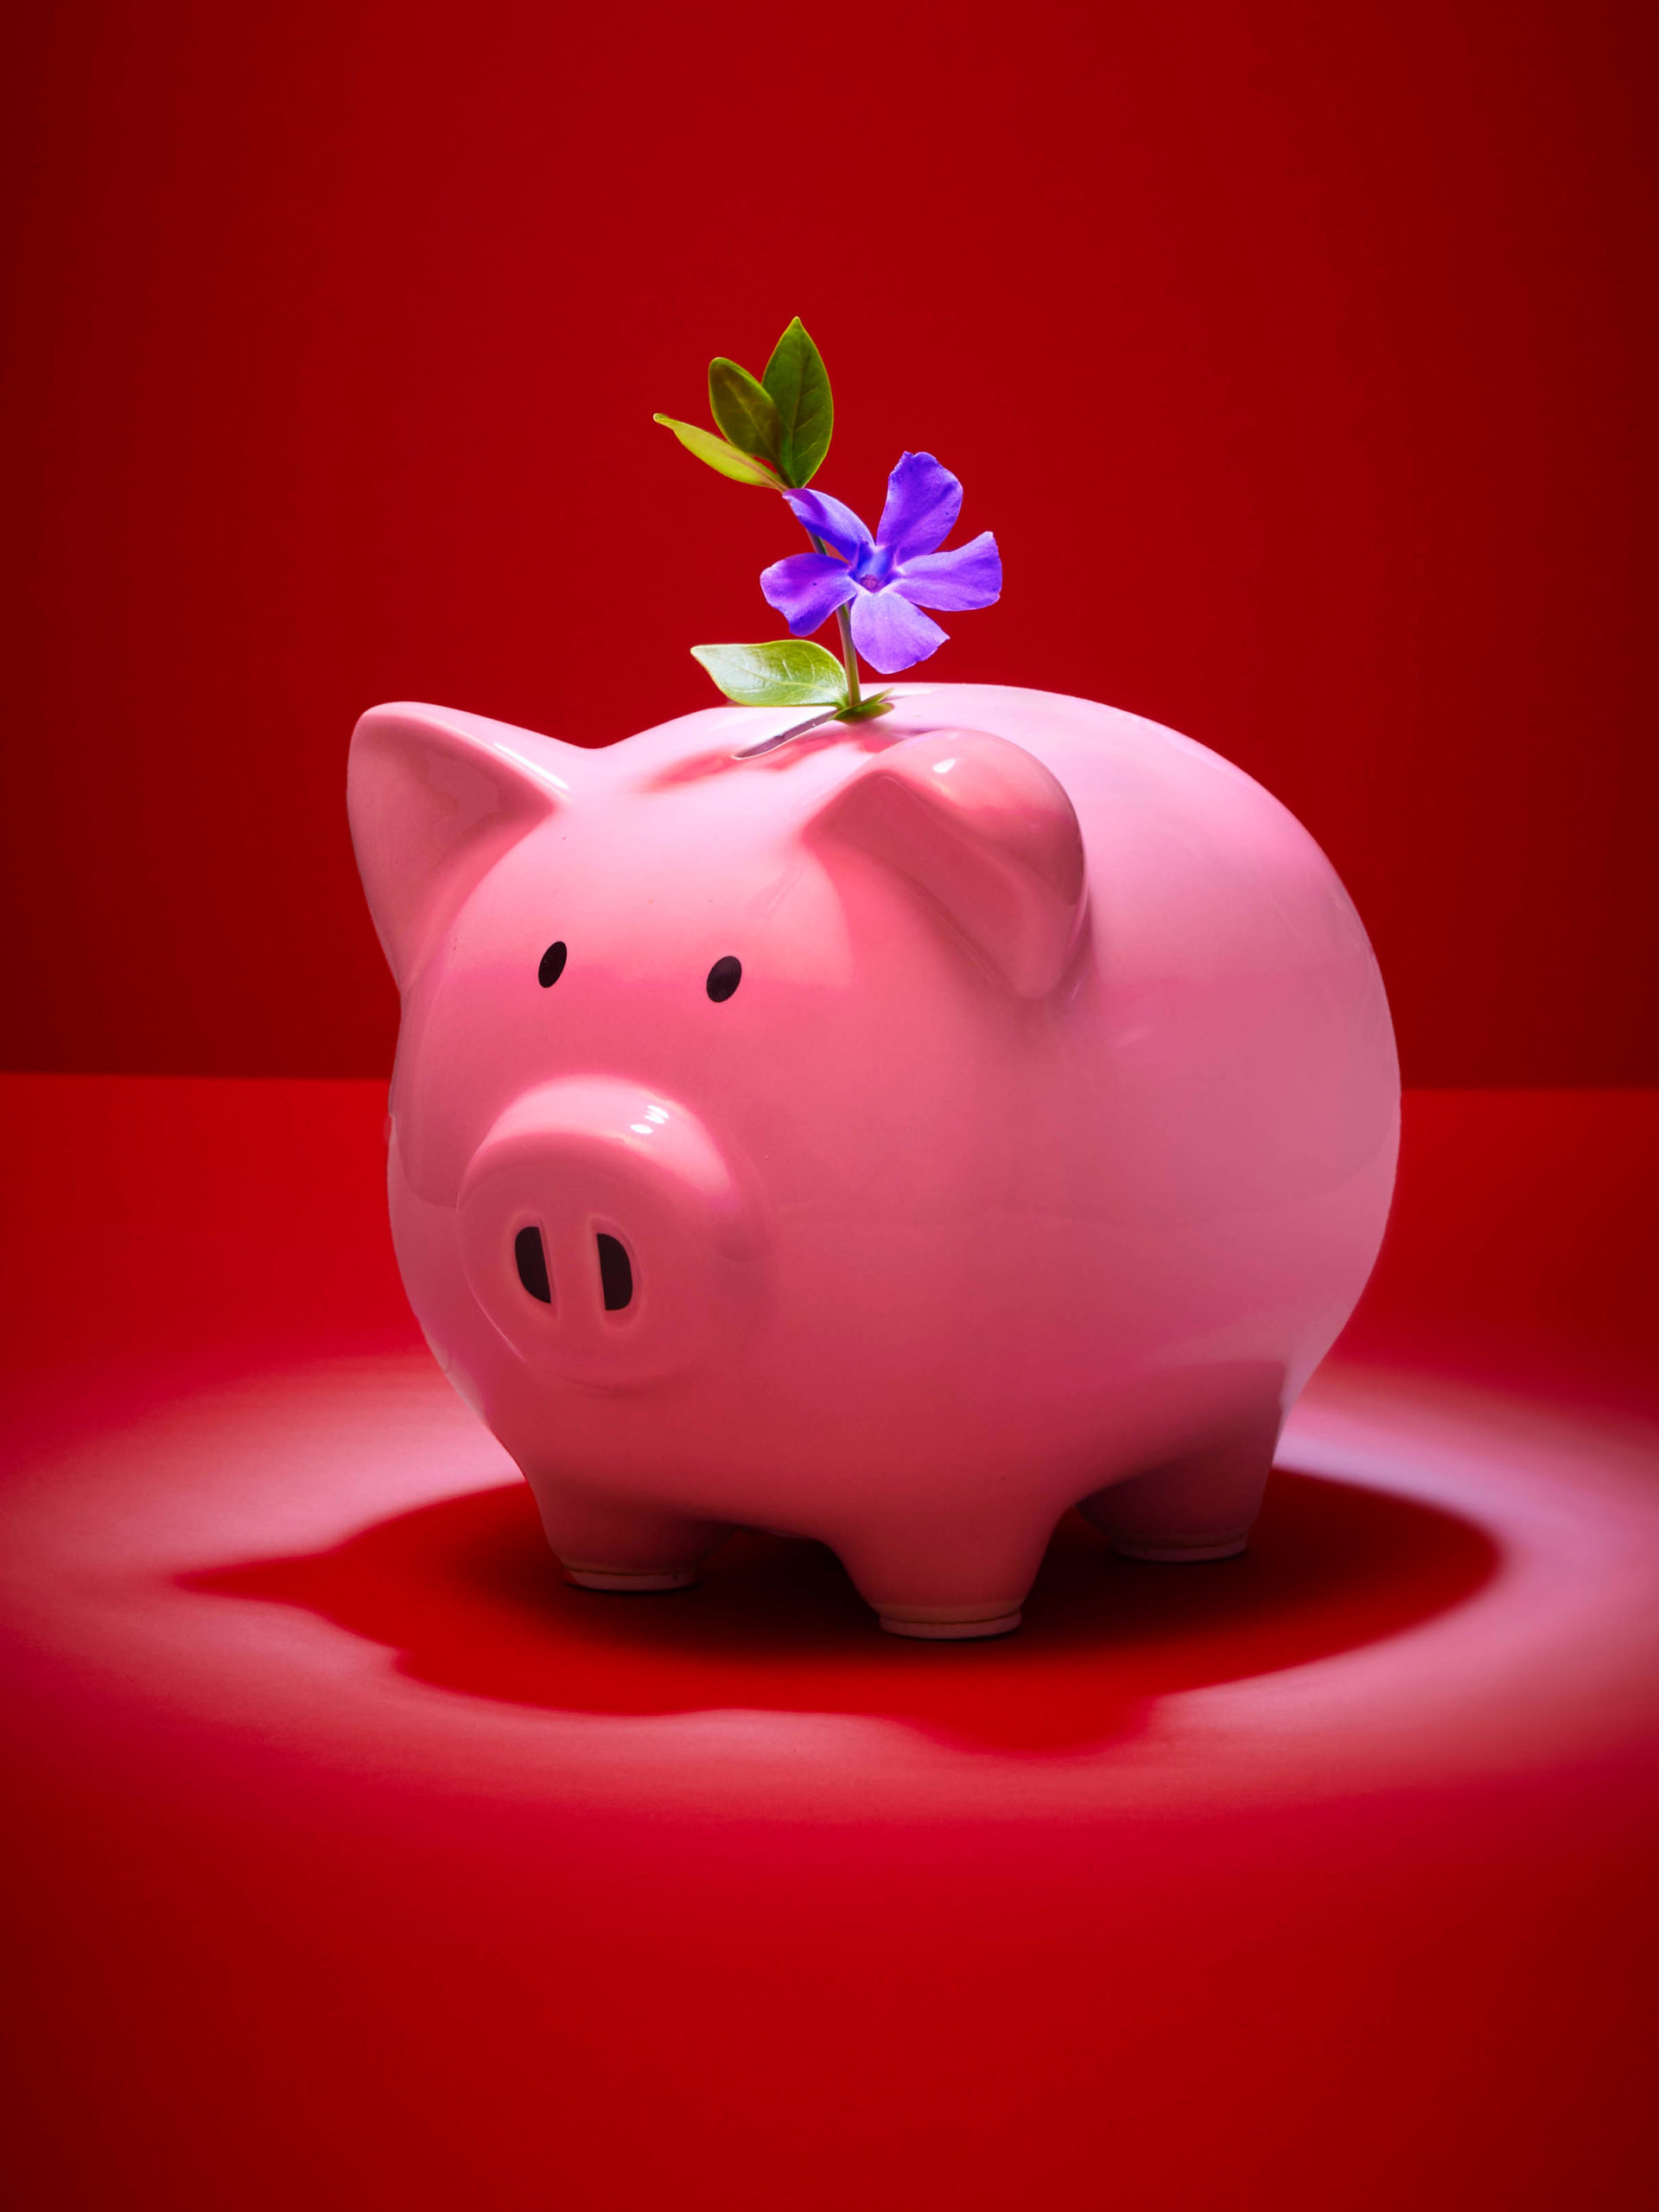 pink ceramic piggy bank with leaves and blossom sticking out of it on red background